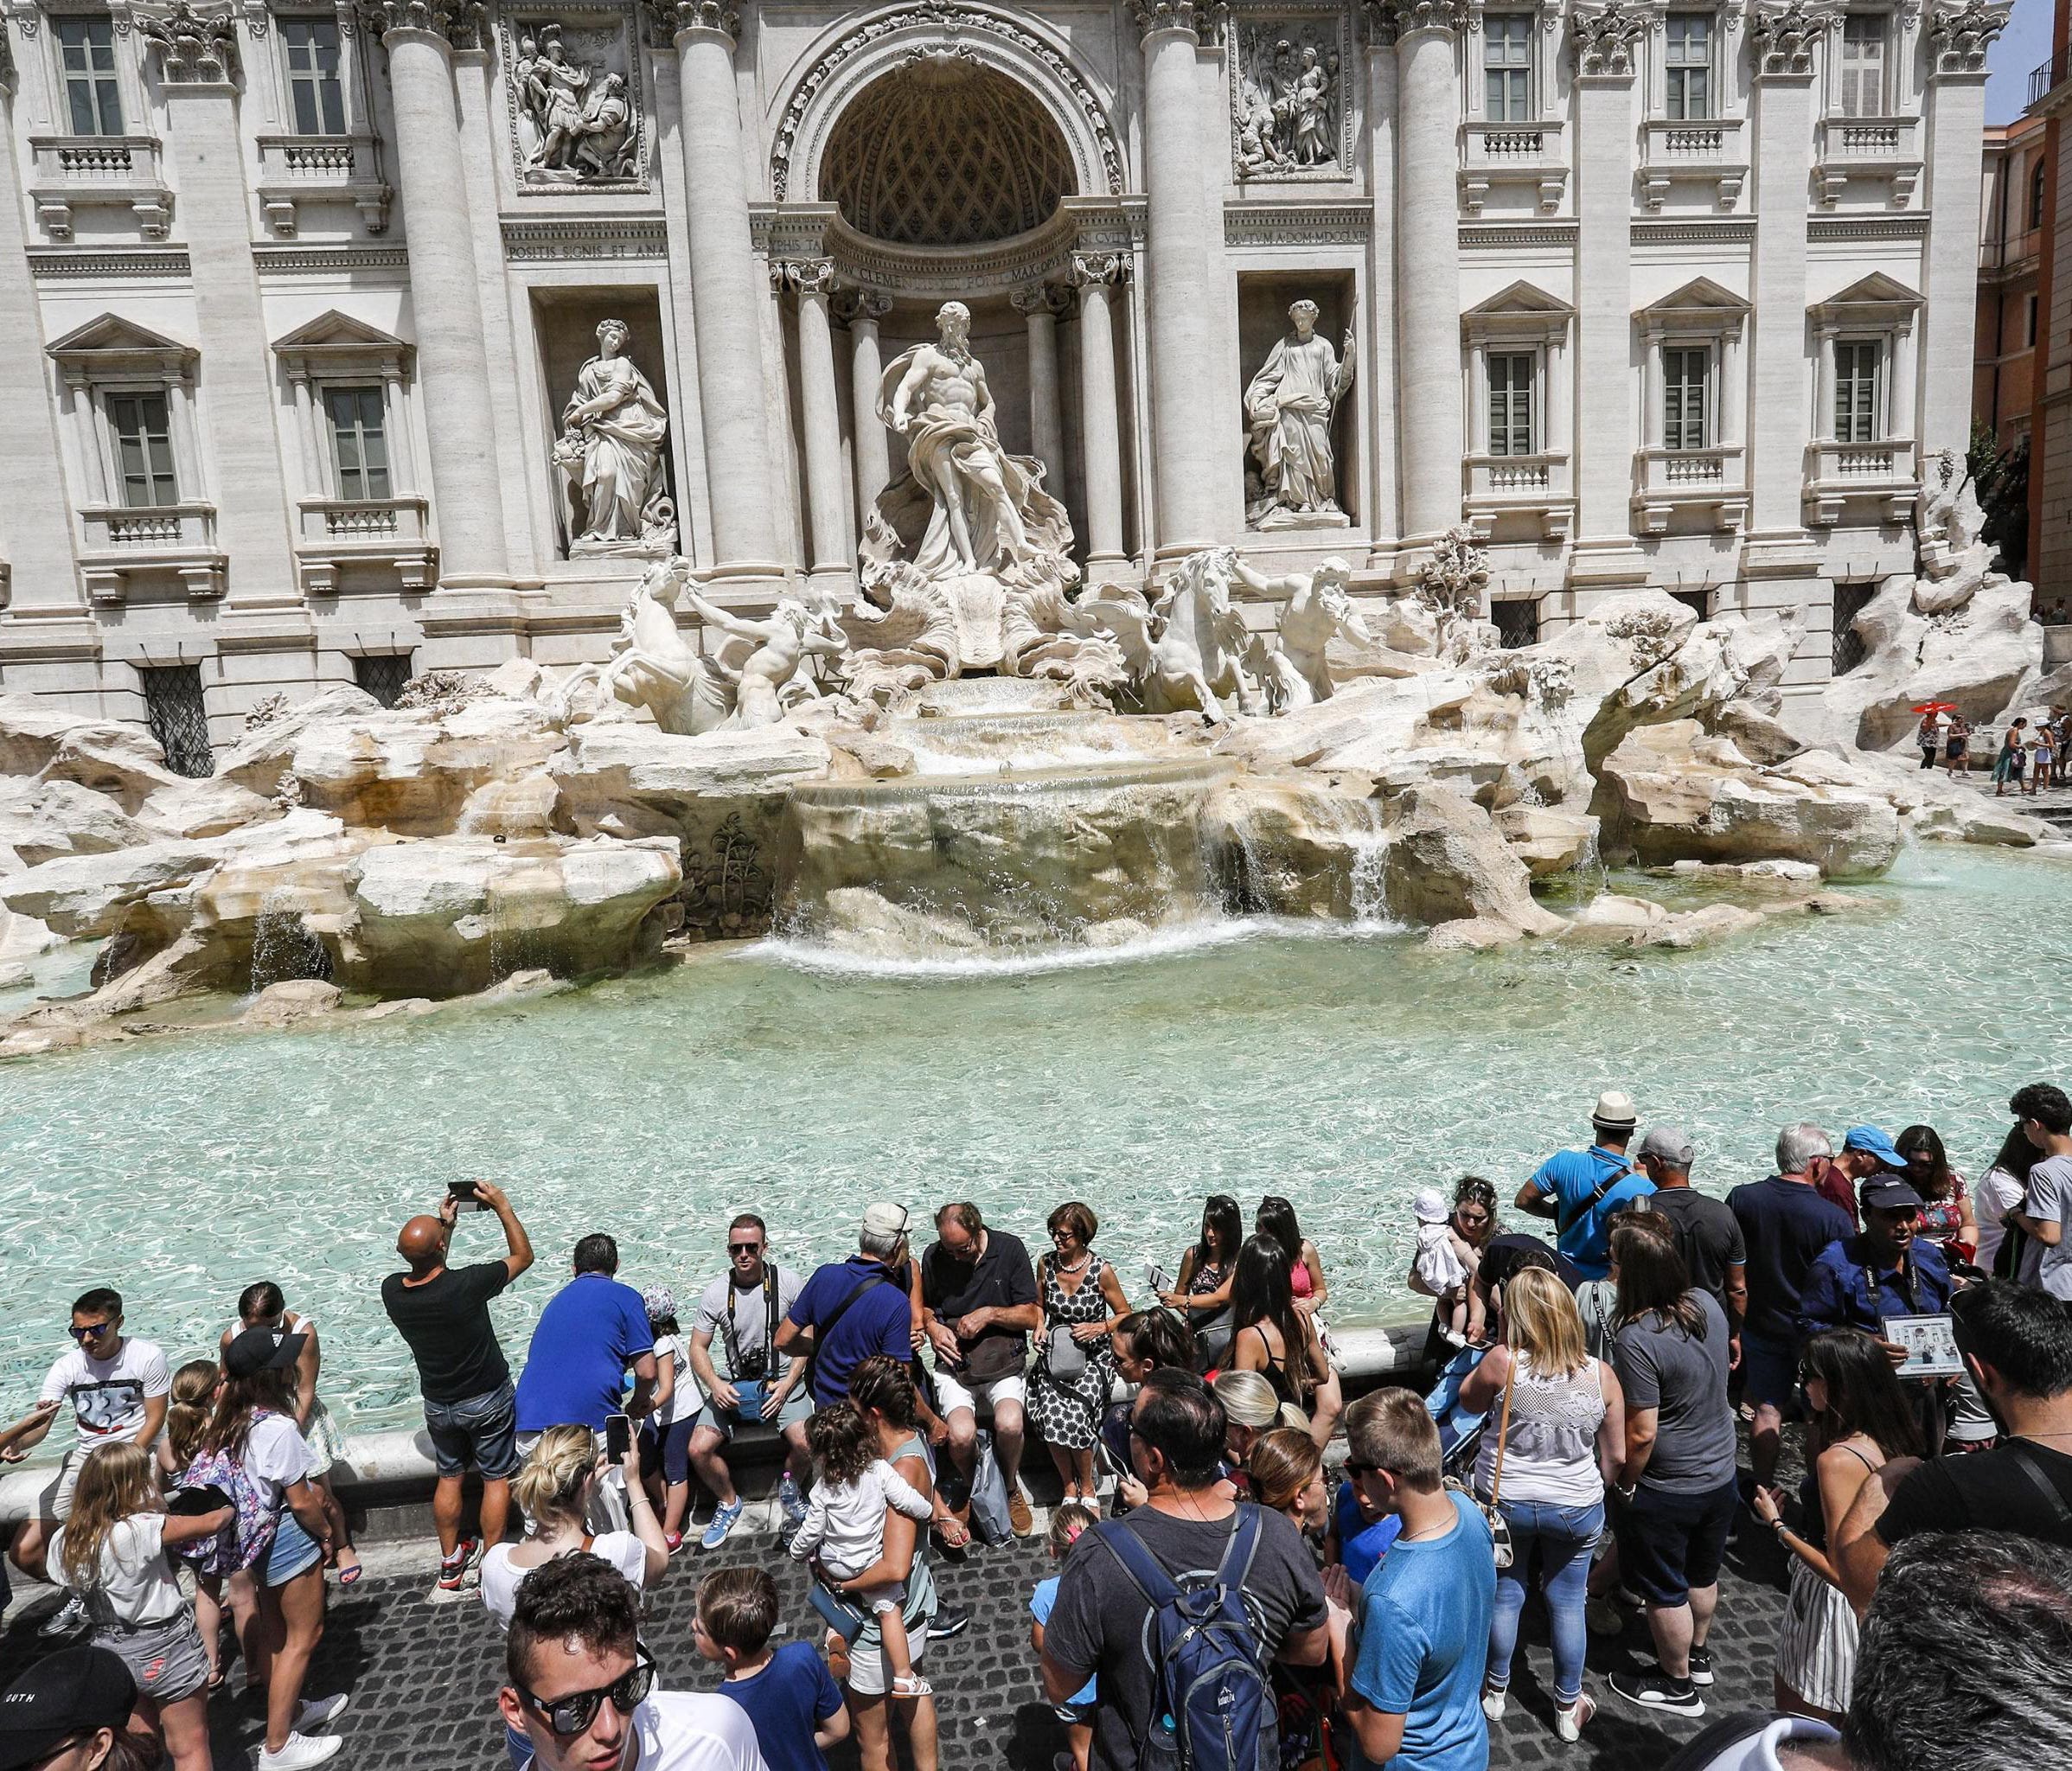 Rome is the 22nd top up-and-coming trending summer international destination for the month of July, based on the latest booking data from American Express Travel. Tourists are seen here next to the world-famous Trevi Fountain during a hot day in July